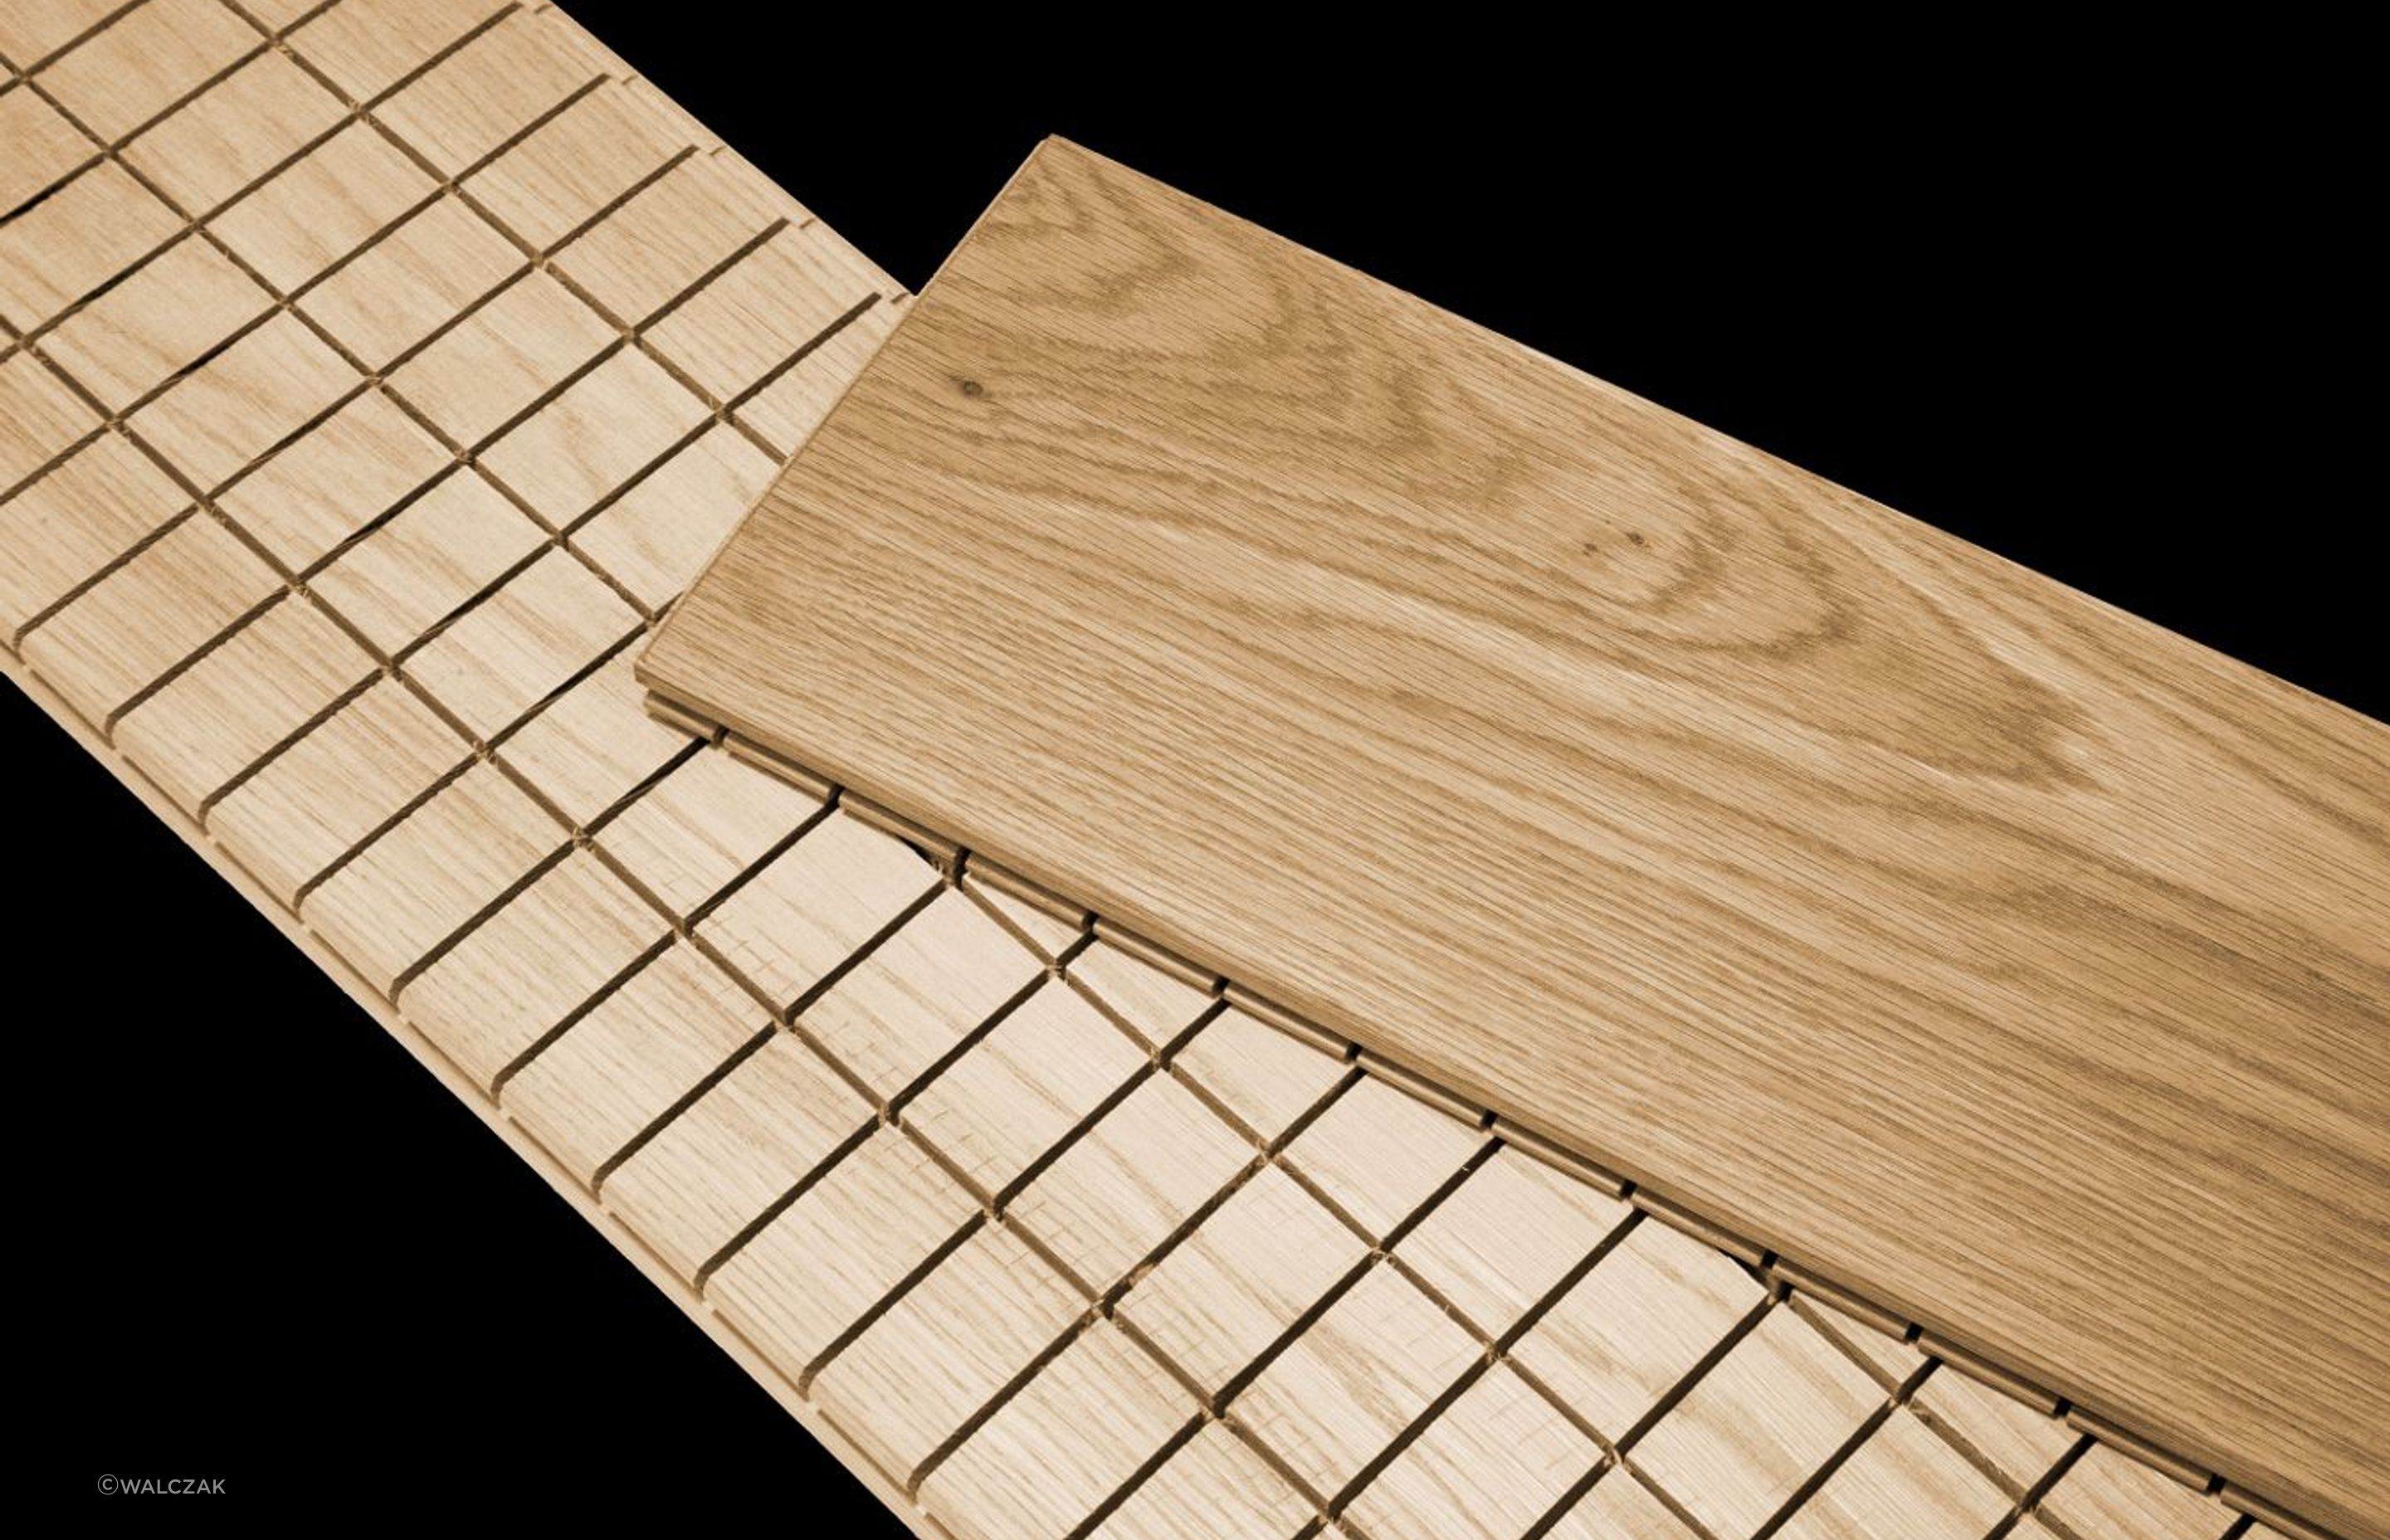 Solid timber flooring for underfloor heating? Facts and Myths.